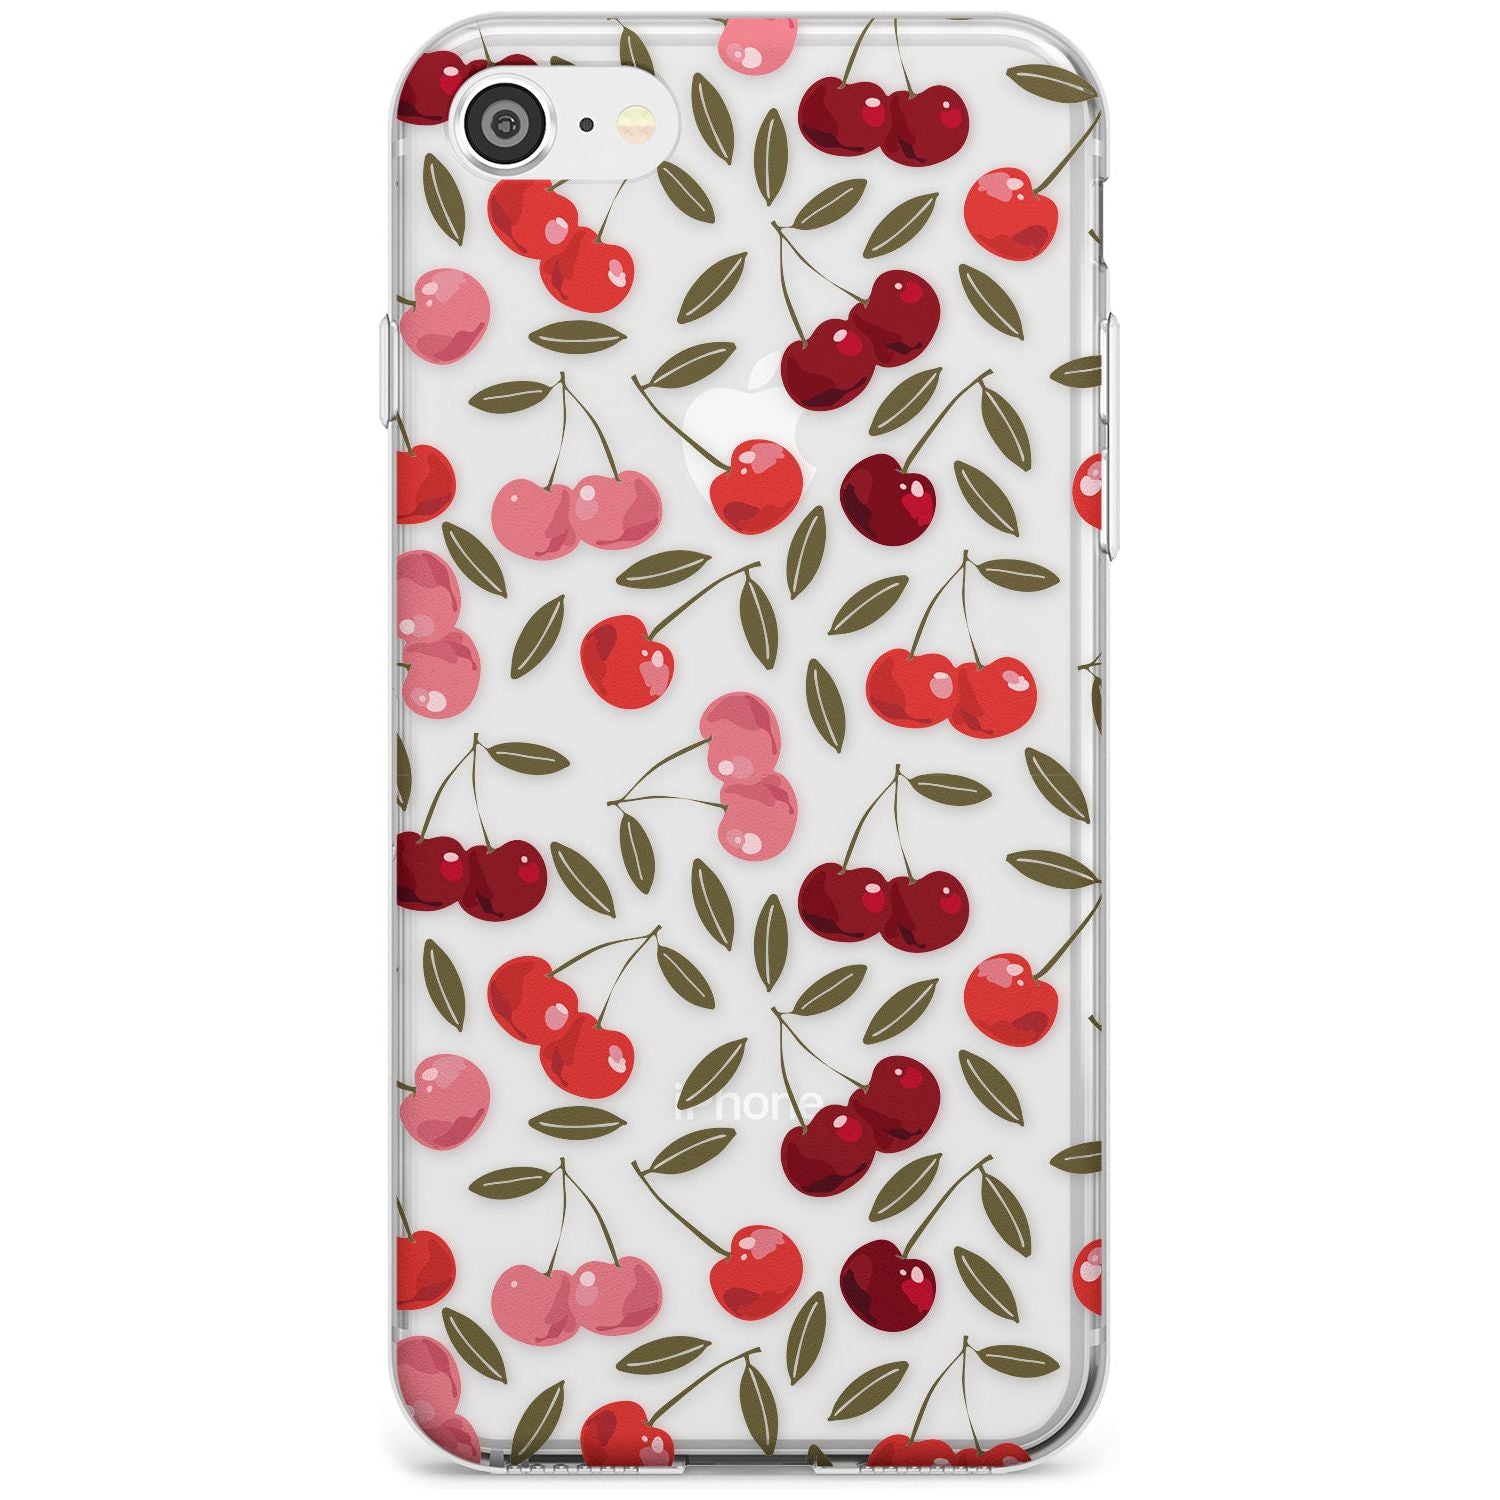 Cherry on top Slim TPU Phone Case for iPhone SE 8 7 Plus